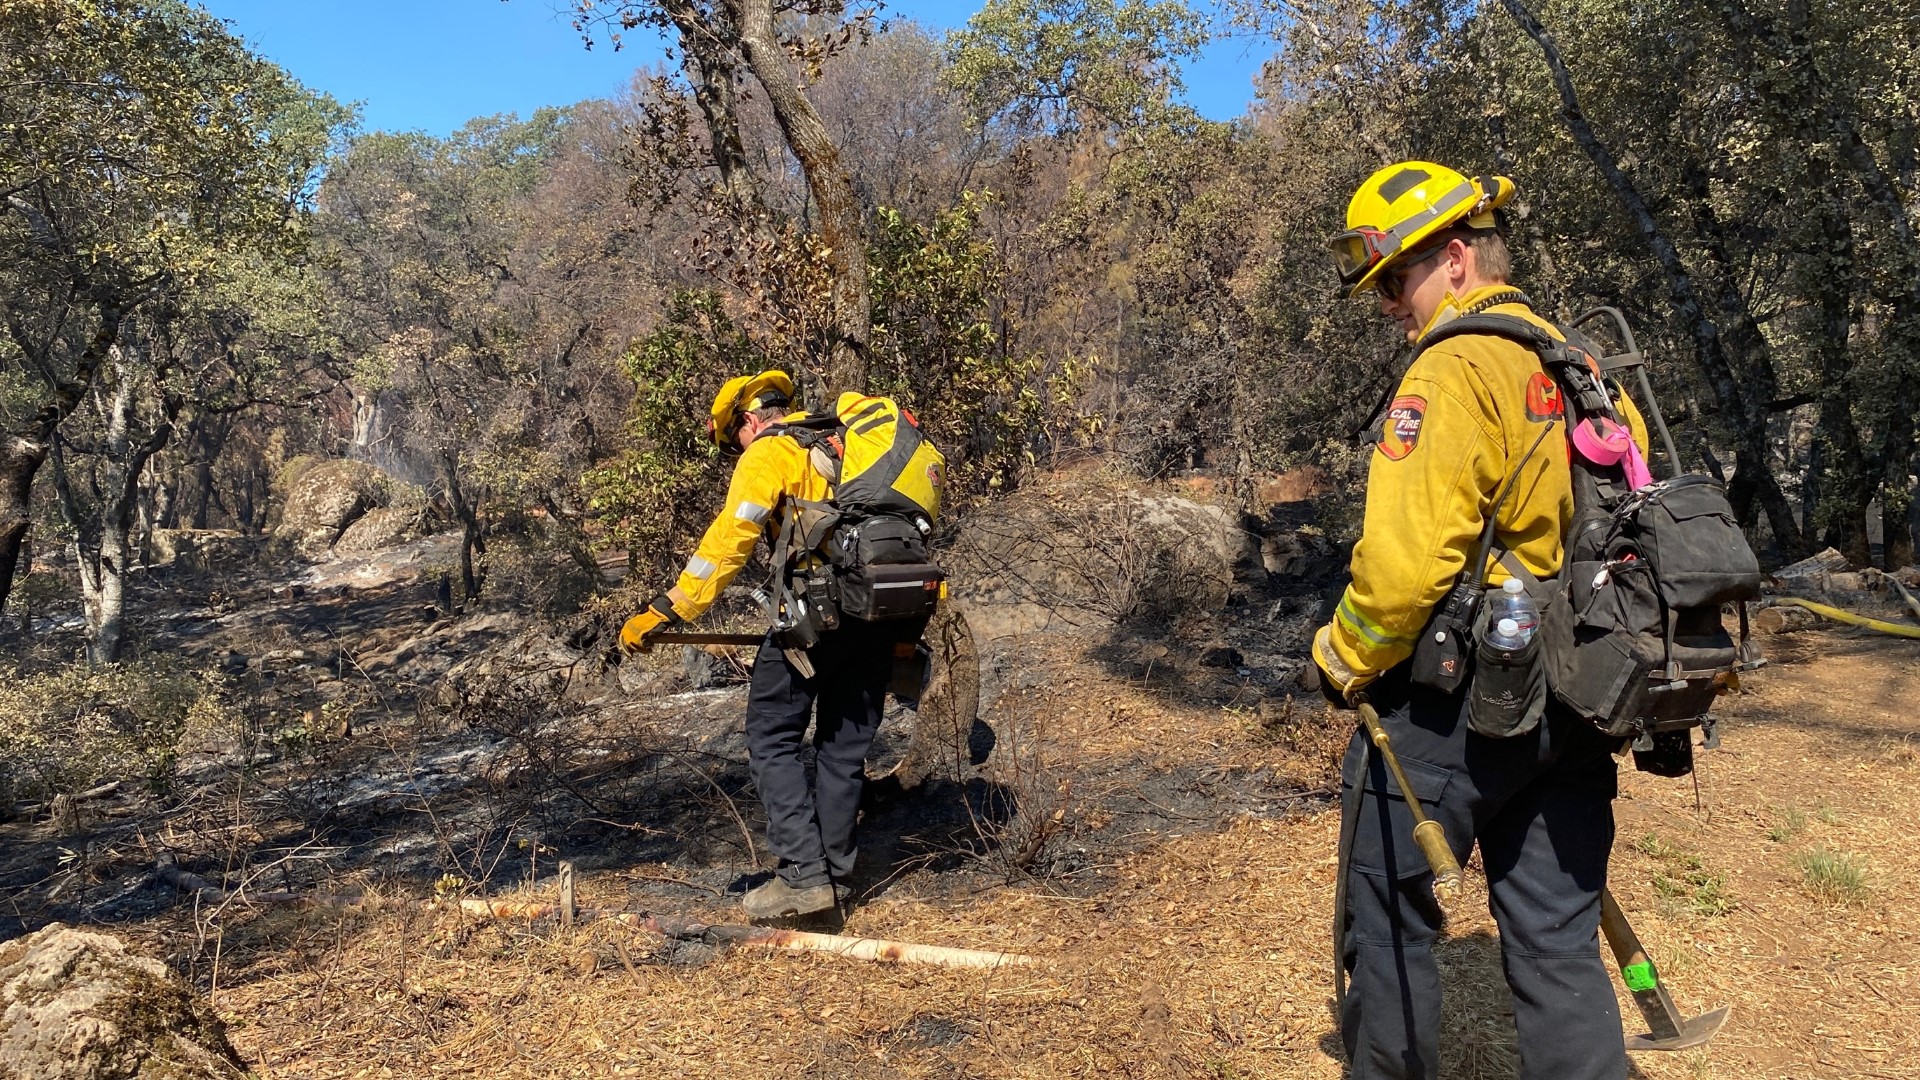 The Rices Fire, Nelson Fire, and Sandra Fire are keeping firefighters busy in Northern California.